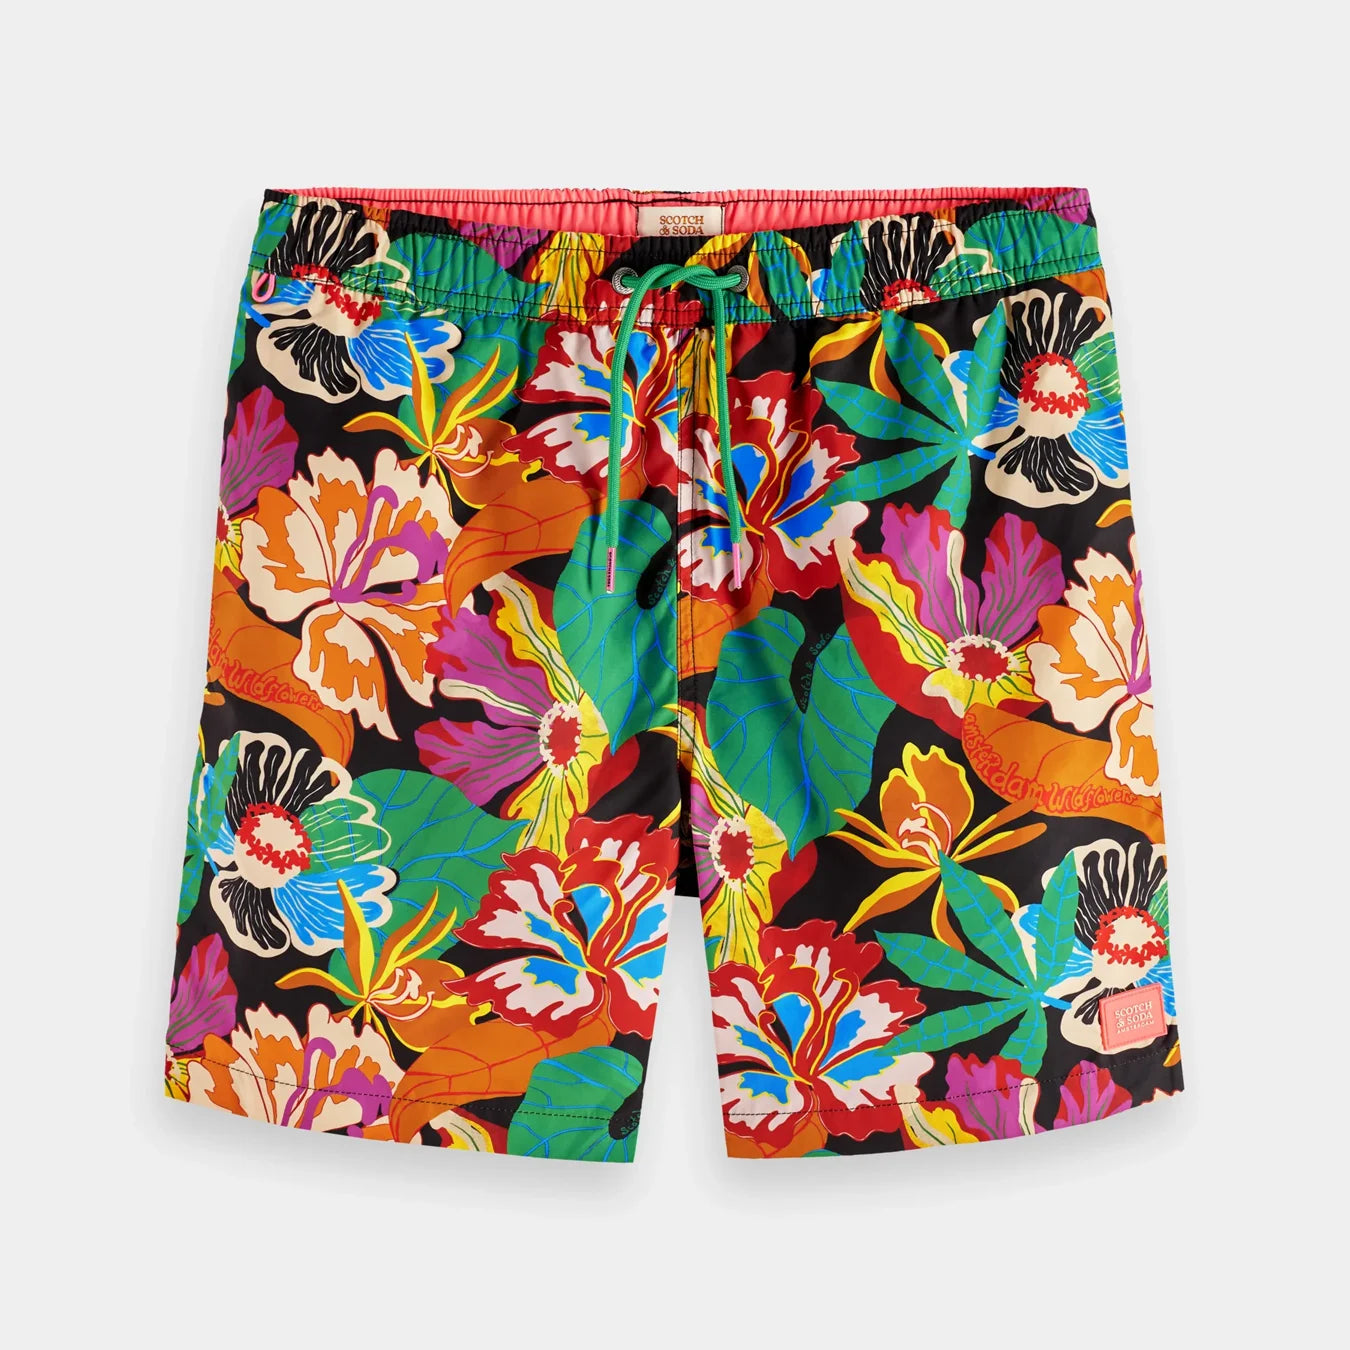 'Scotch & Soda Mid-Length Printed Swim Shorts' in 'Black Floral' colour